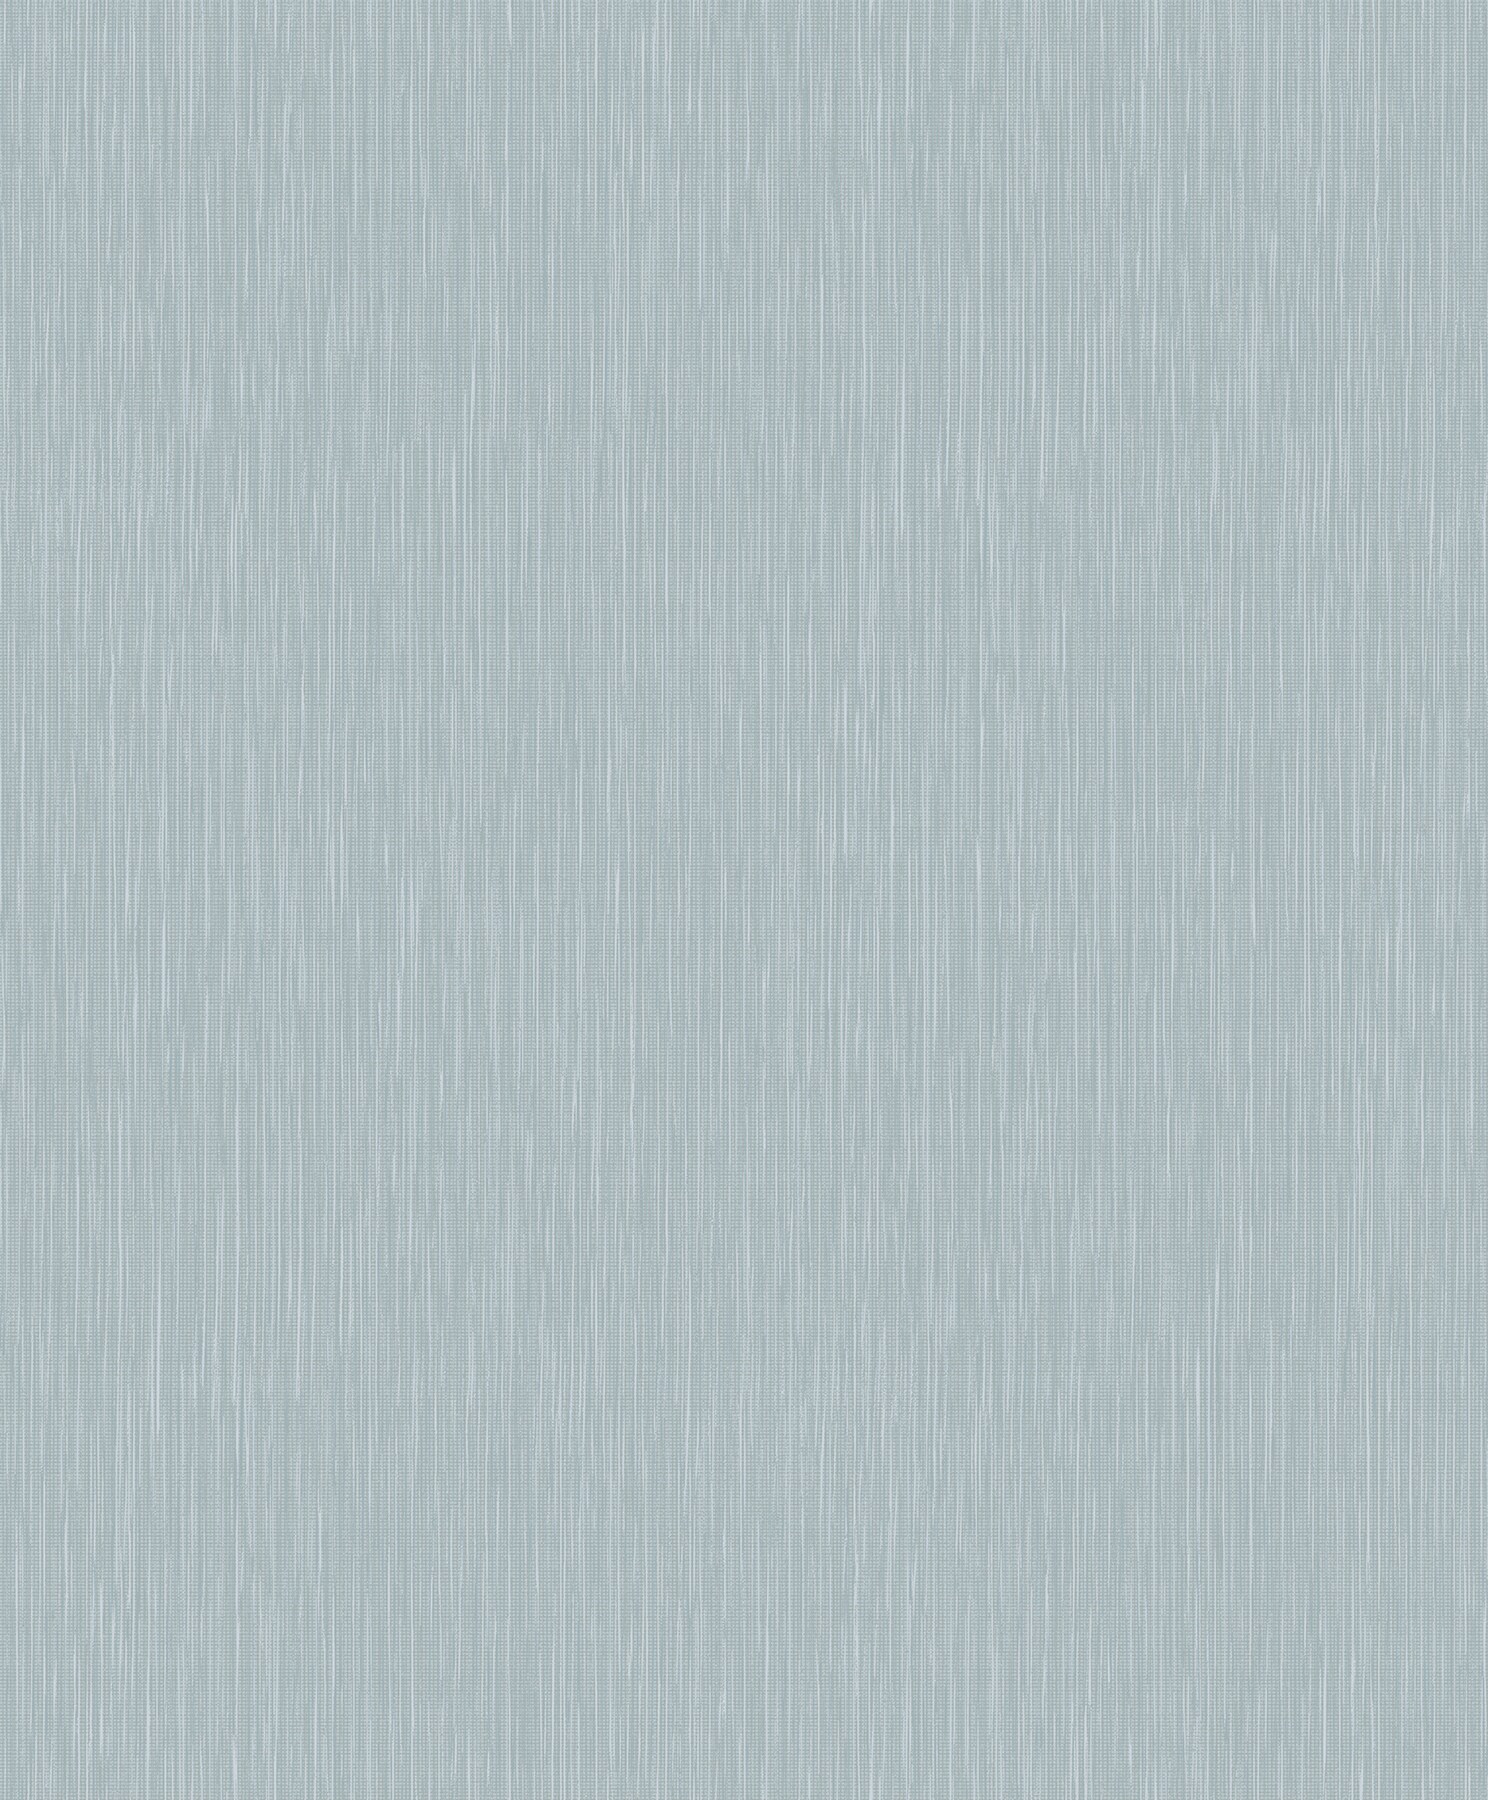 Brewster Textural Essentials 57.8-sq ft Turquoise Non-woven Textured ...